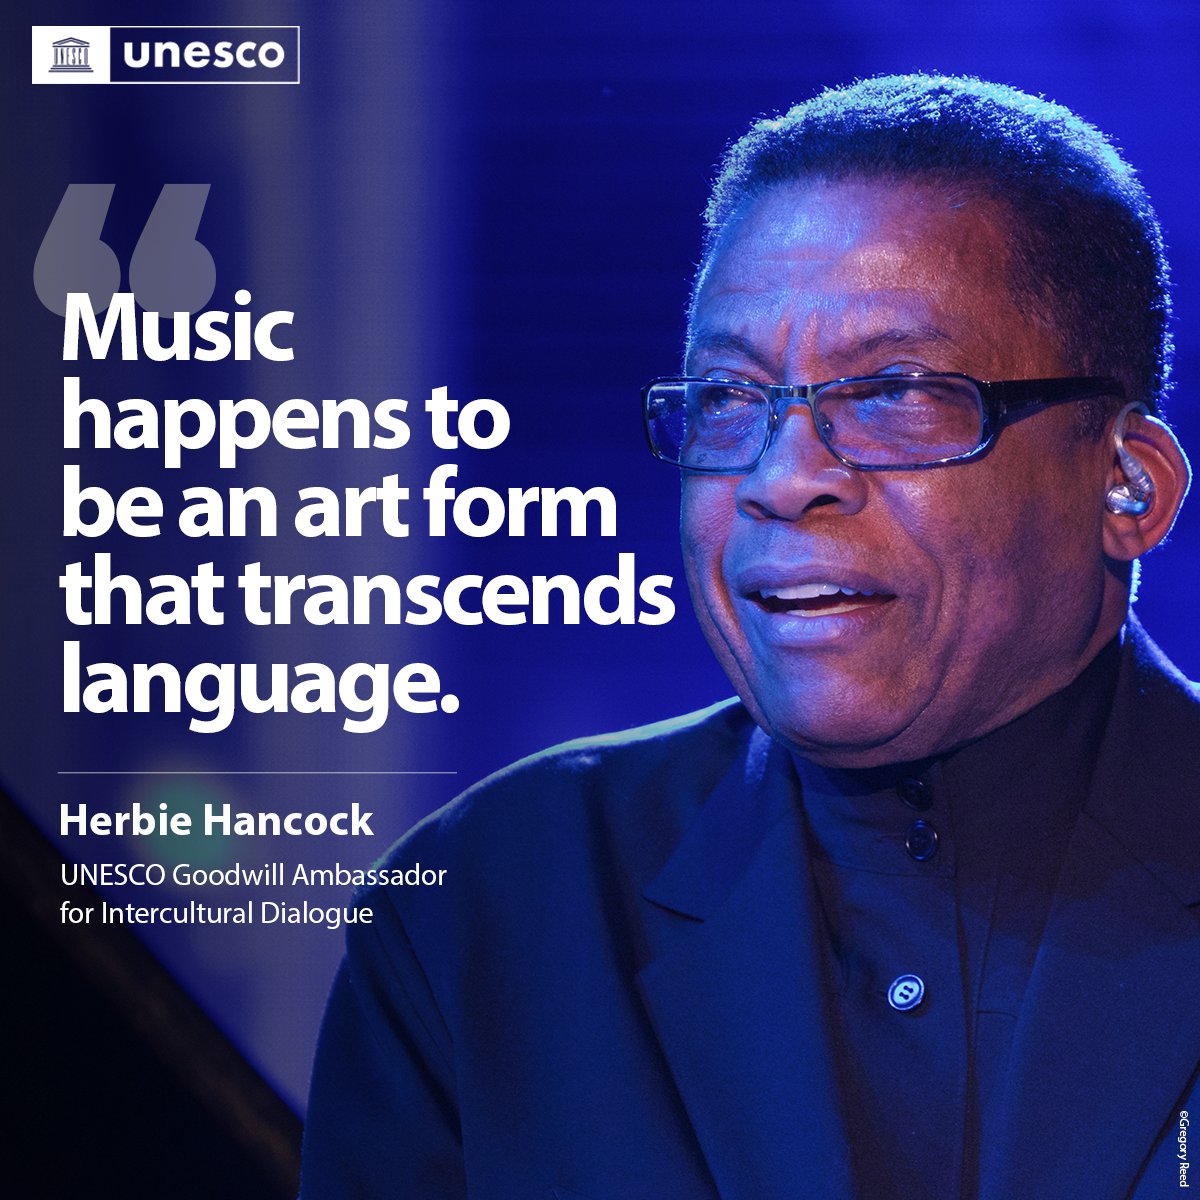 🎂 Happy Birthday to jazz legend & UNESCO Goodwill Ambassador for Intercultural Dialogue, @herbiehancock! His music transcends cultures & unites us all. From pioneering jazz fusion to global collaborations, Herbie's work shows the power of music to bring people together 🎶…